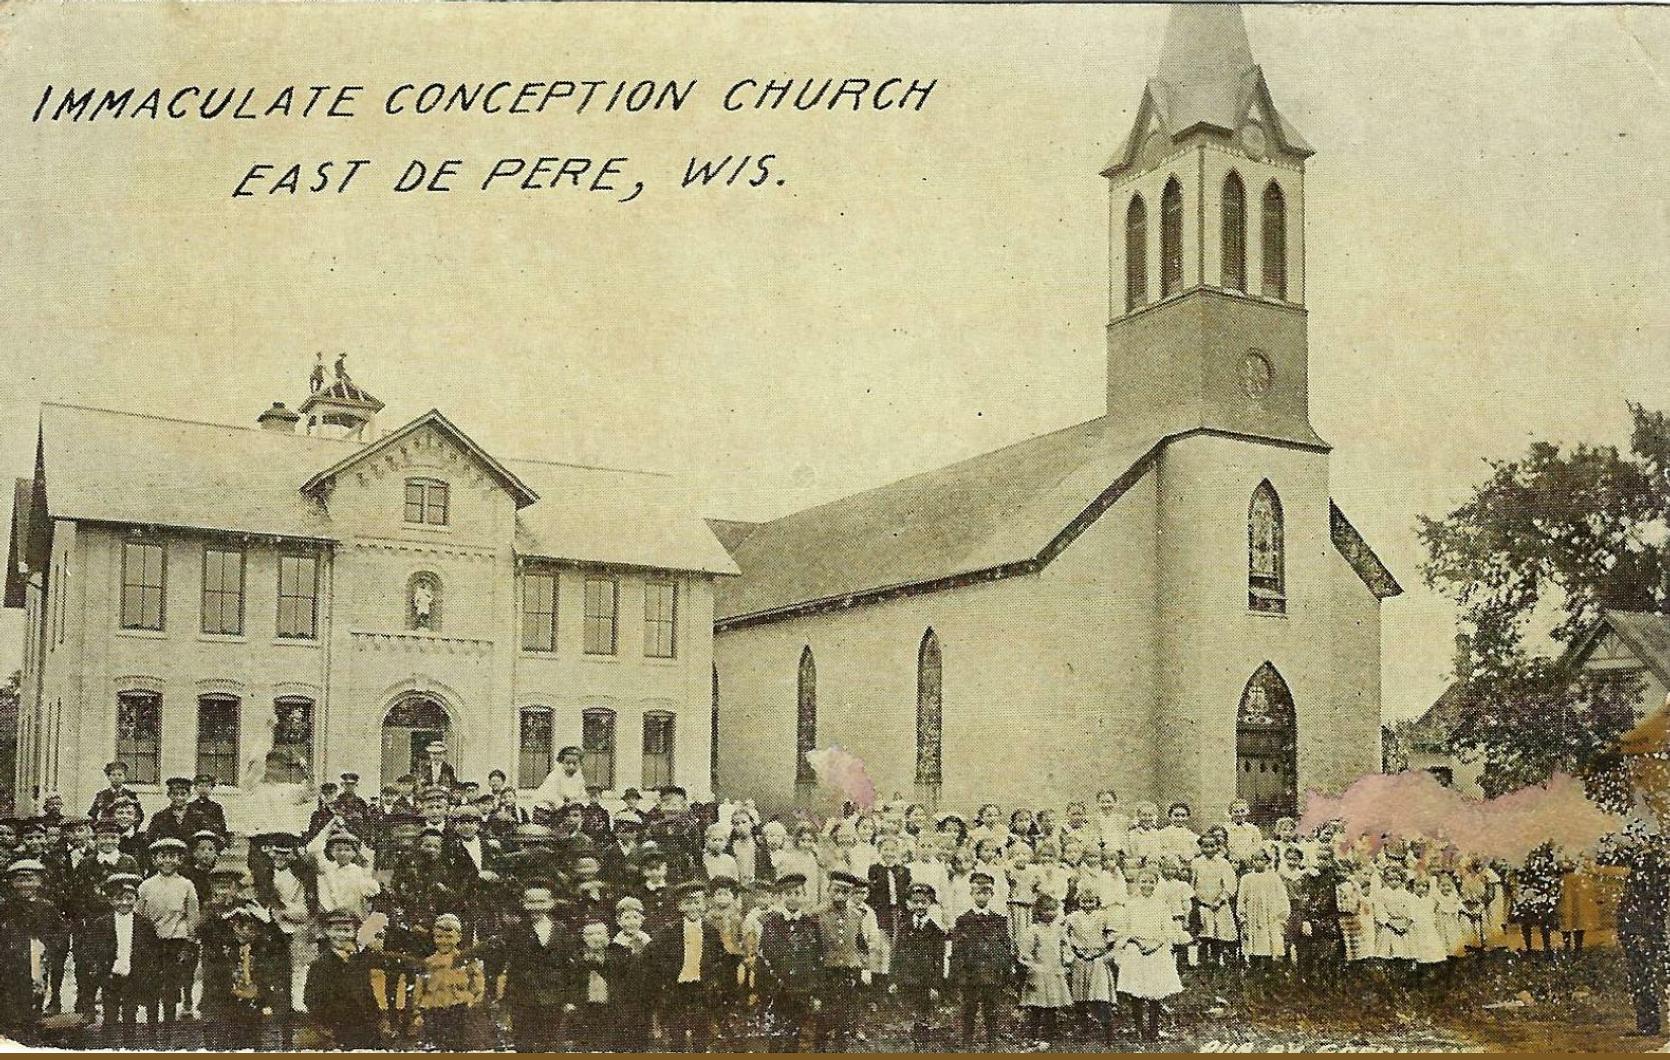 Immaculate Conception Church • UNKNOWN YEAR